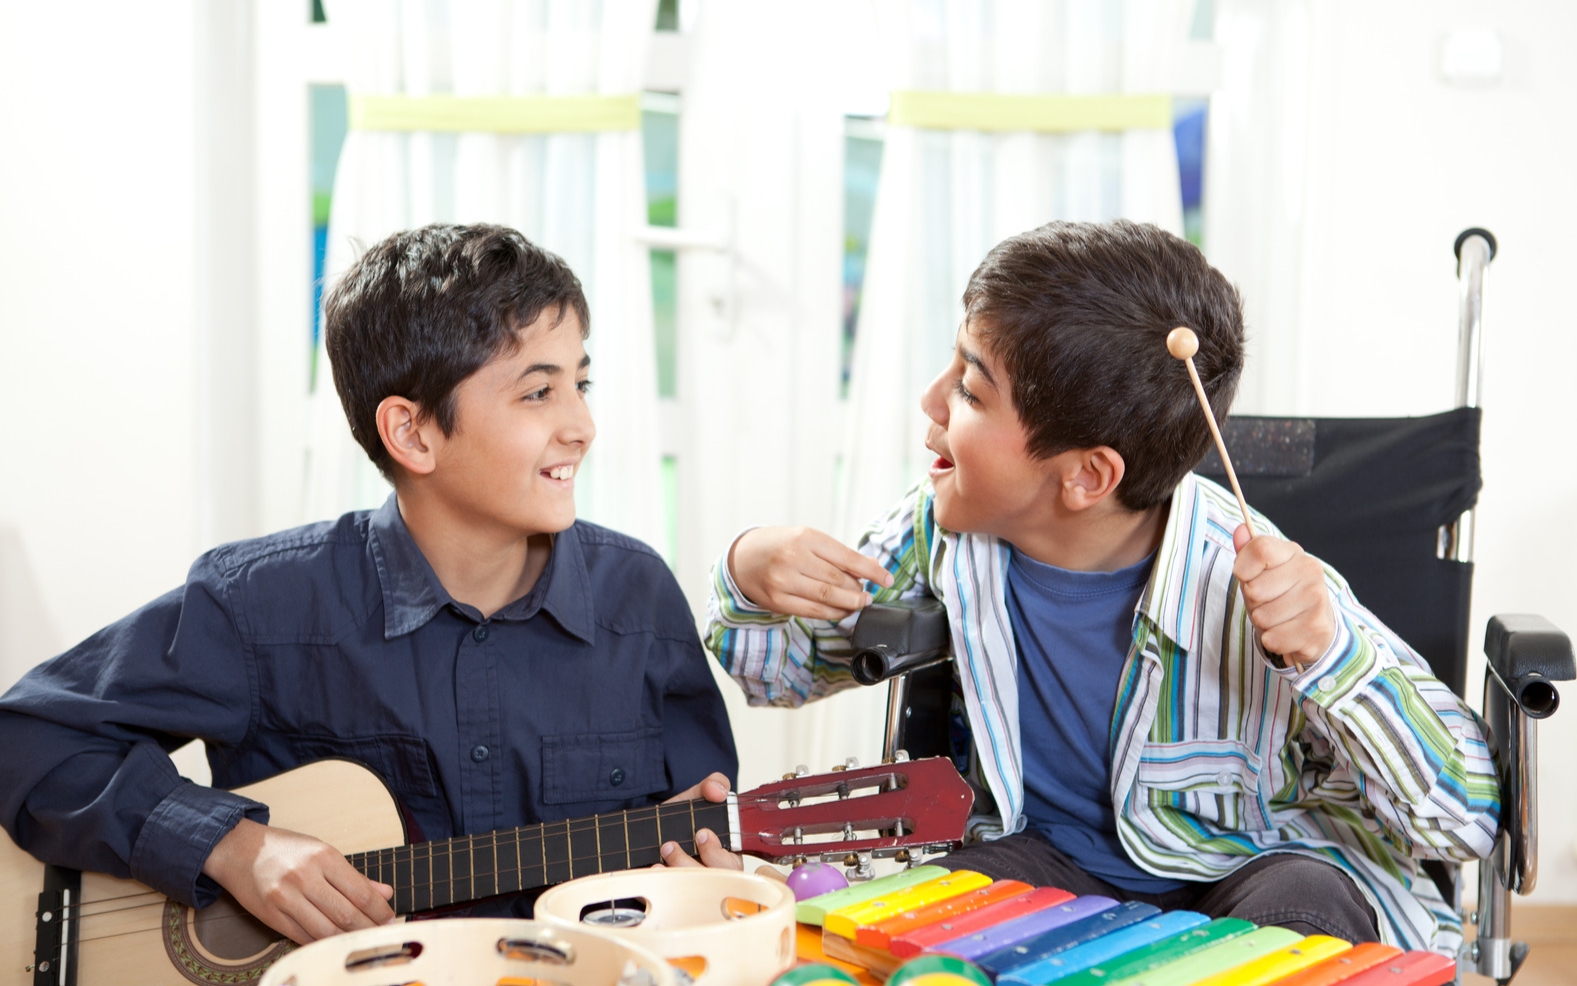 music therapy interventions for autism